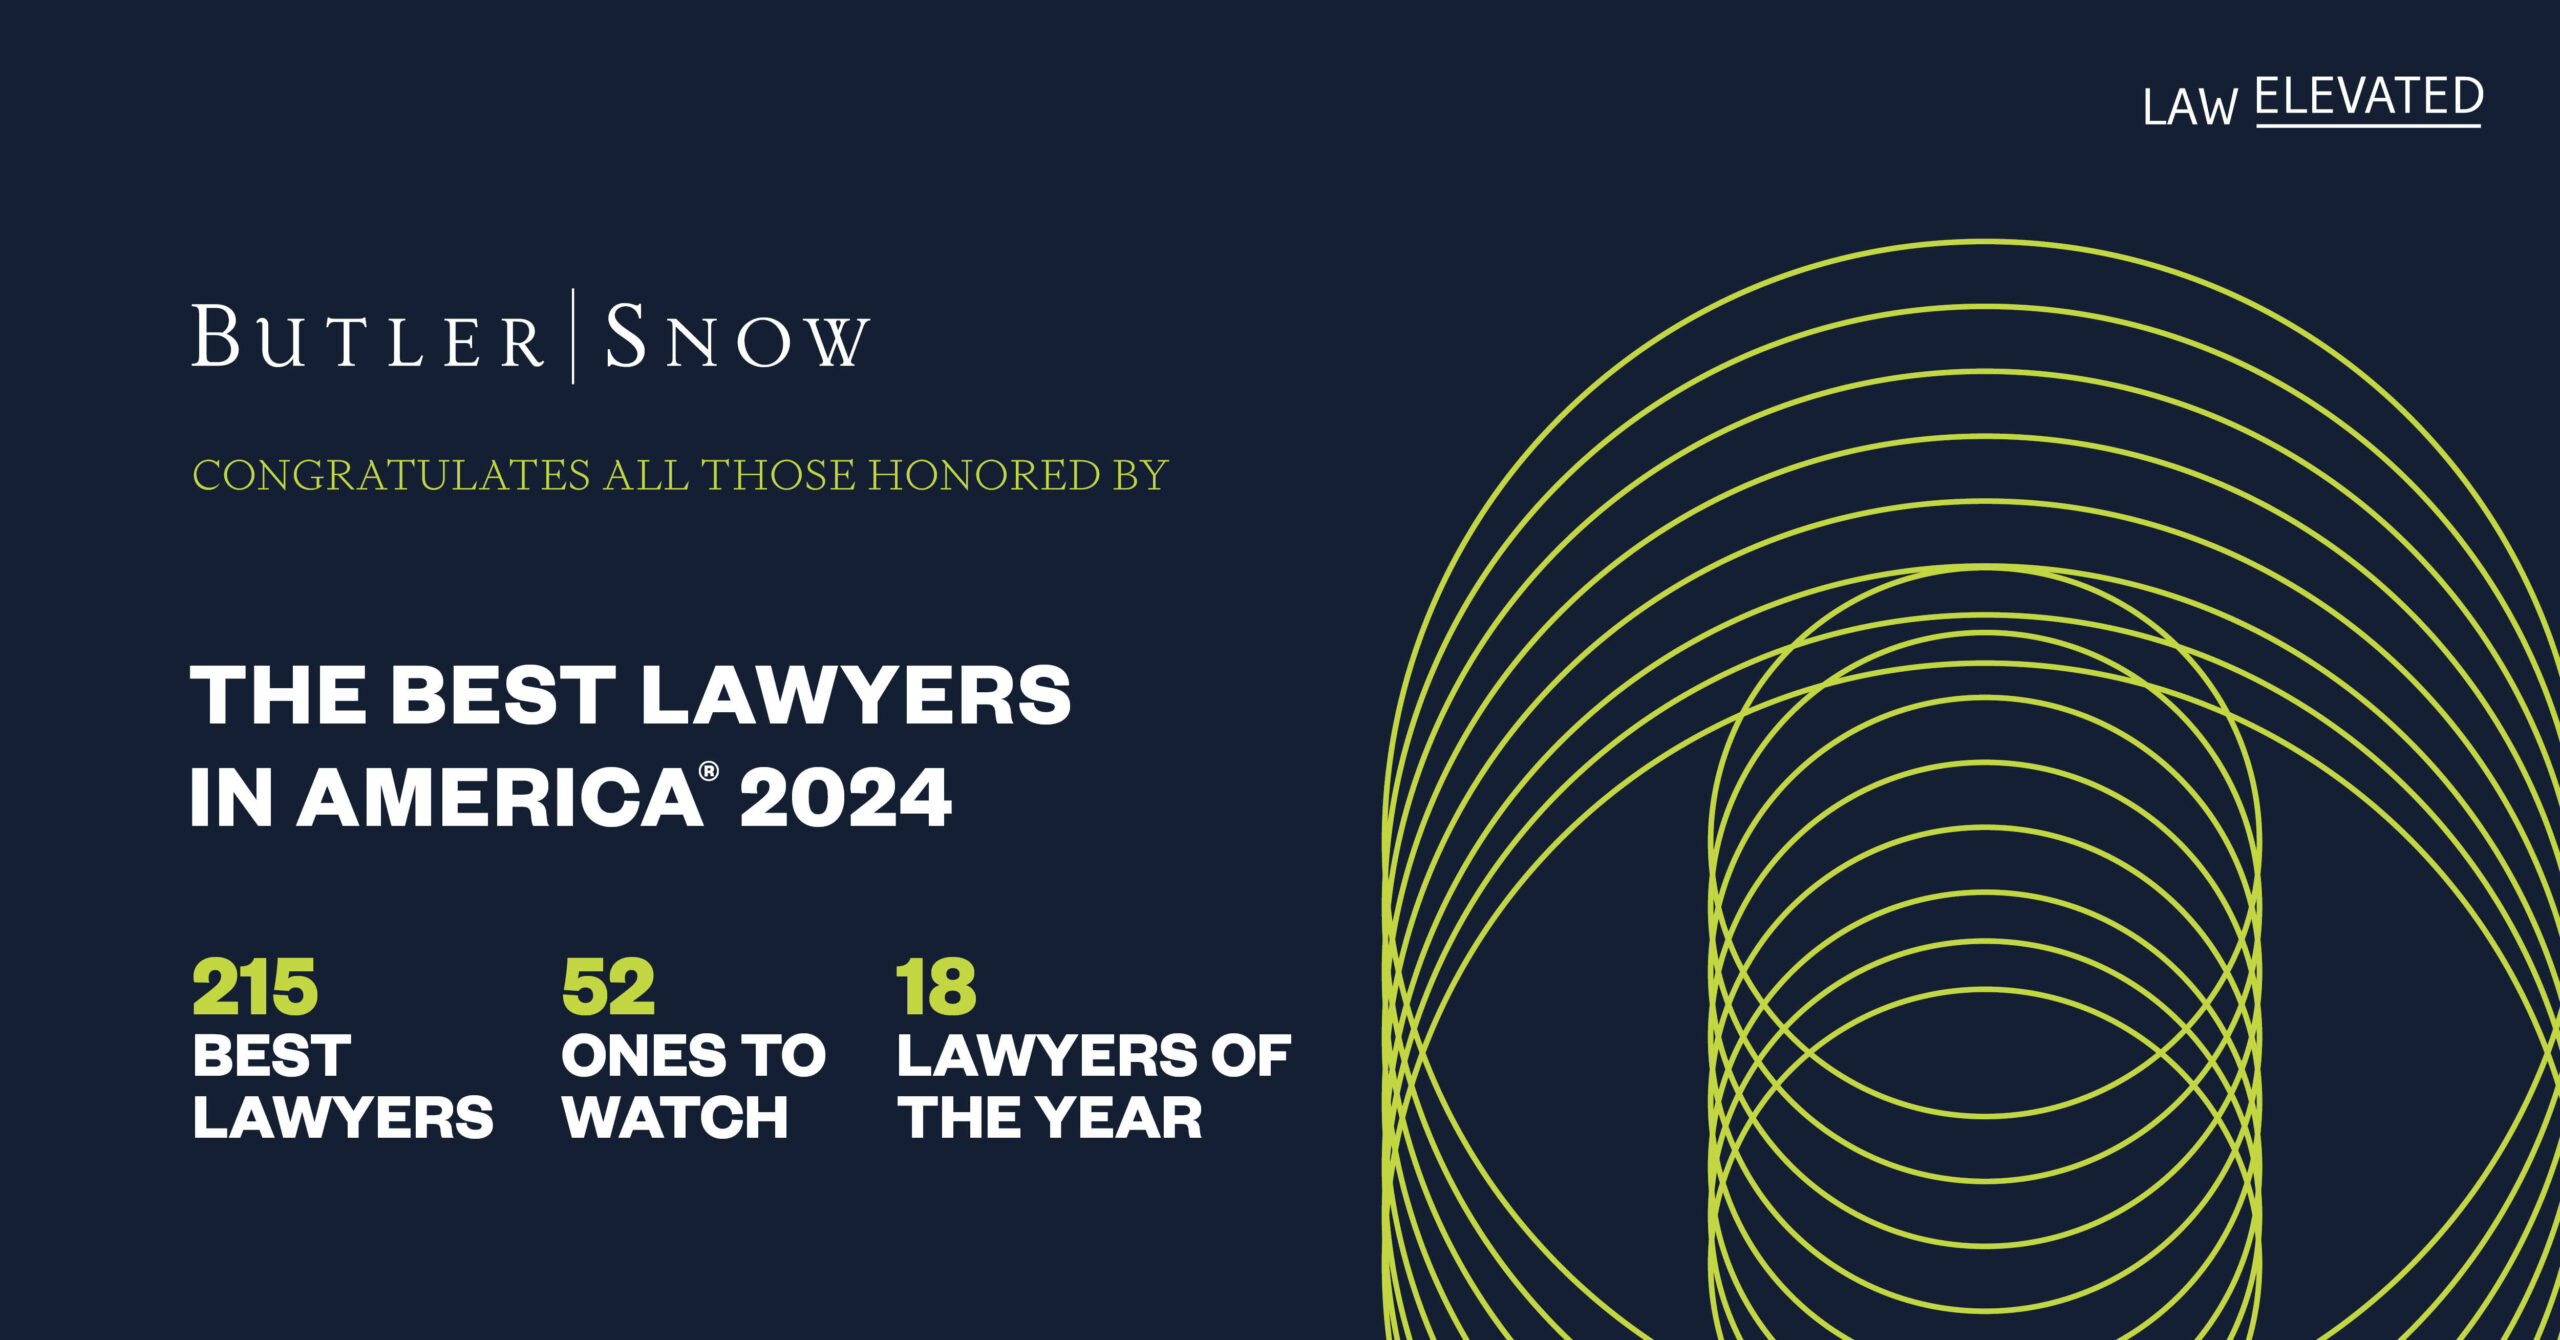 267 Butler Snow Attorneys Recognized in 2024 Best Lawyers Rankings